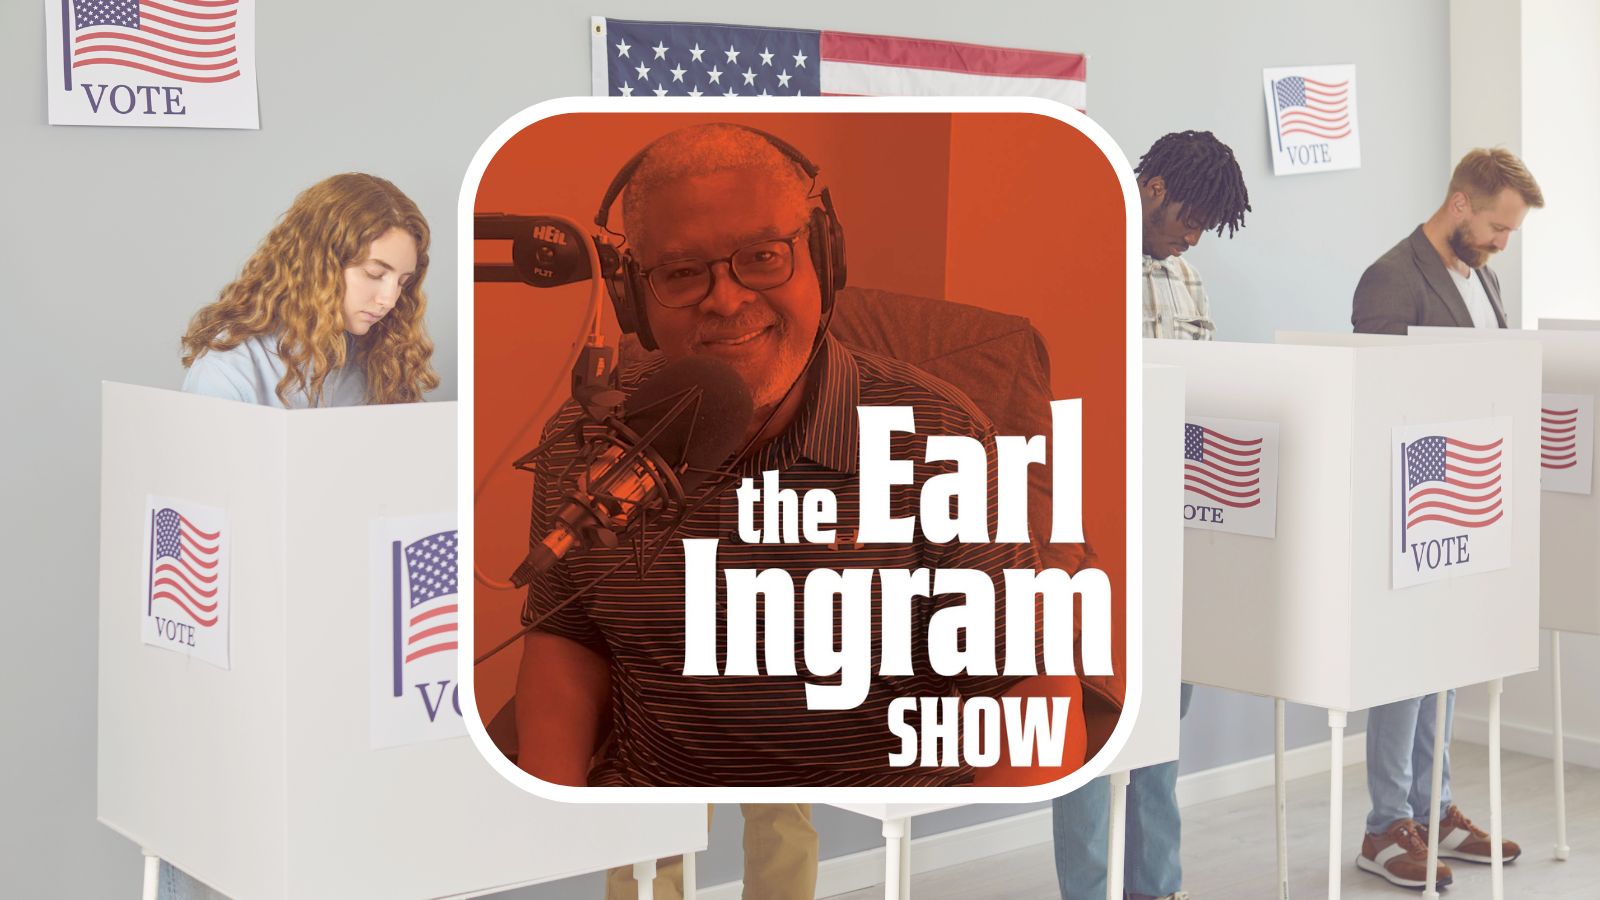 Young voters unhappy with cost of living urged to take concerns to the polls on The Earl Ingram Show